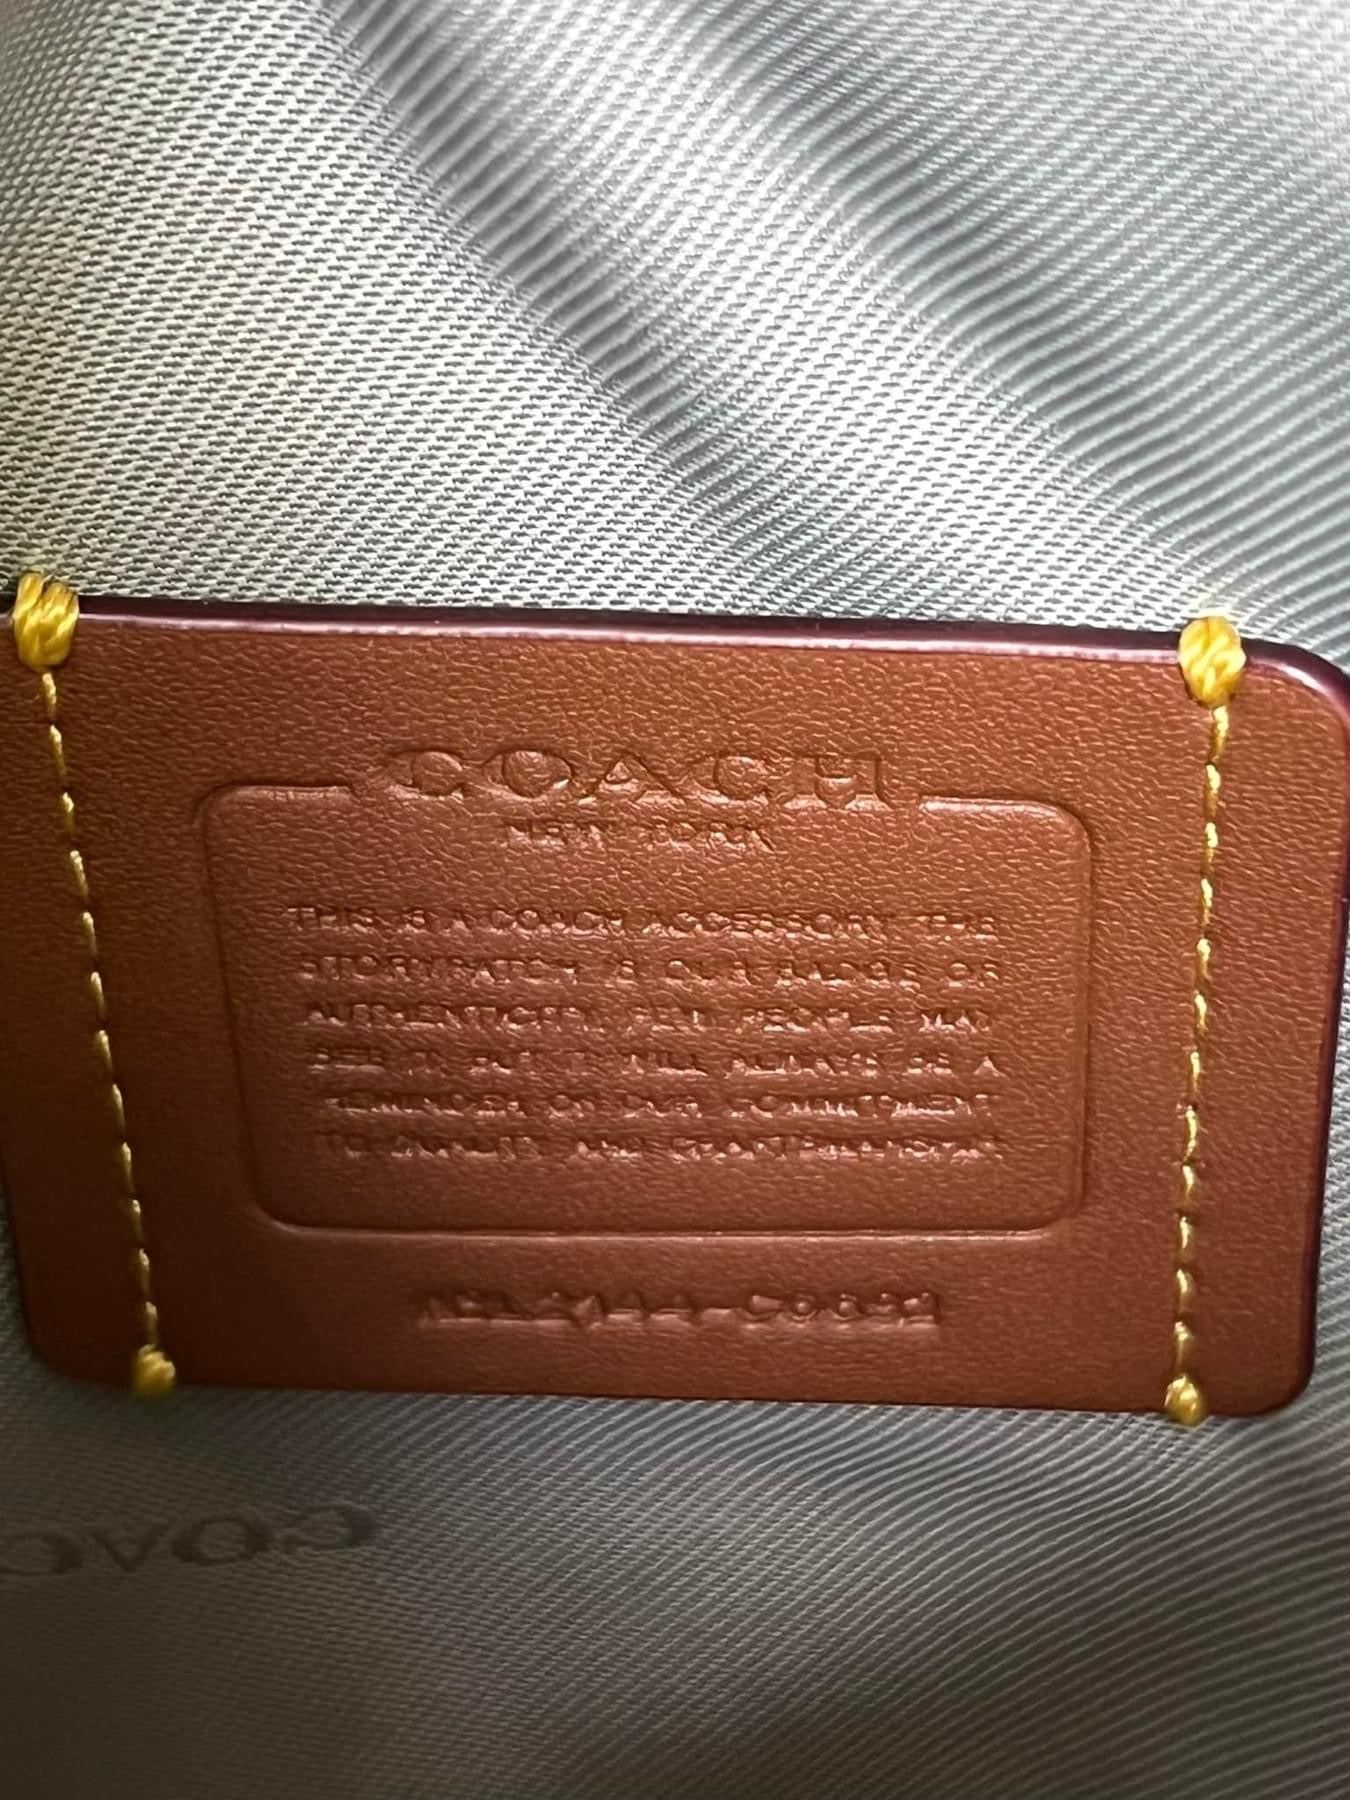 Coach Charter North/South Crossbody With Hybrid Pouch In Colorblock